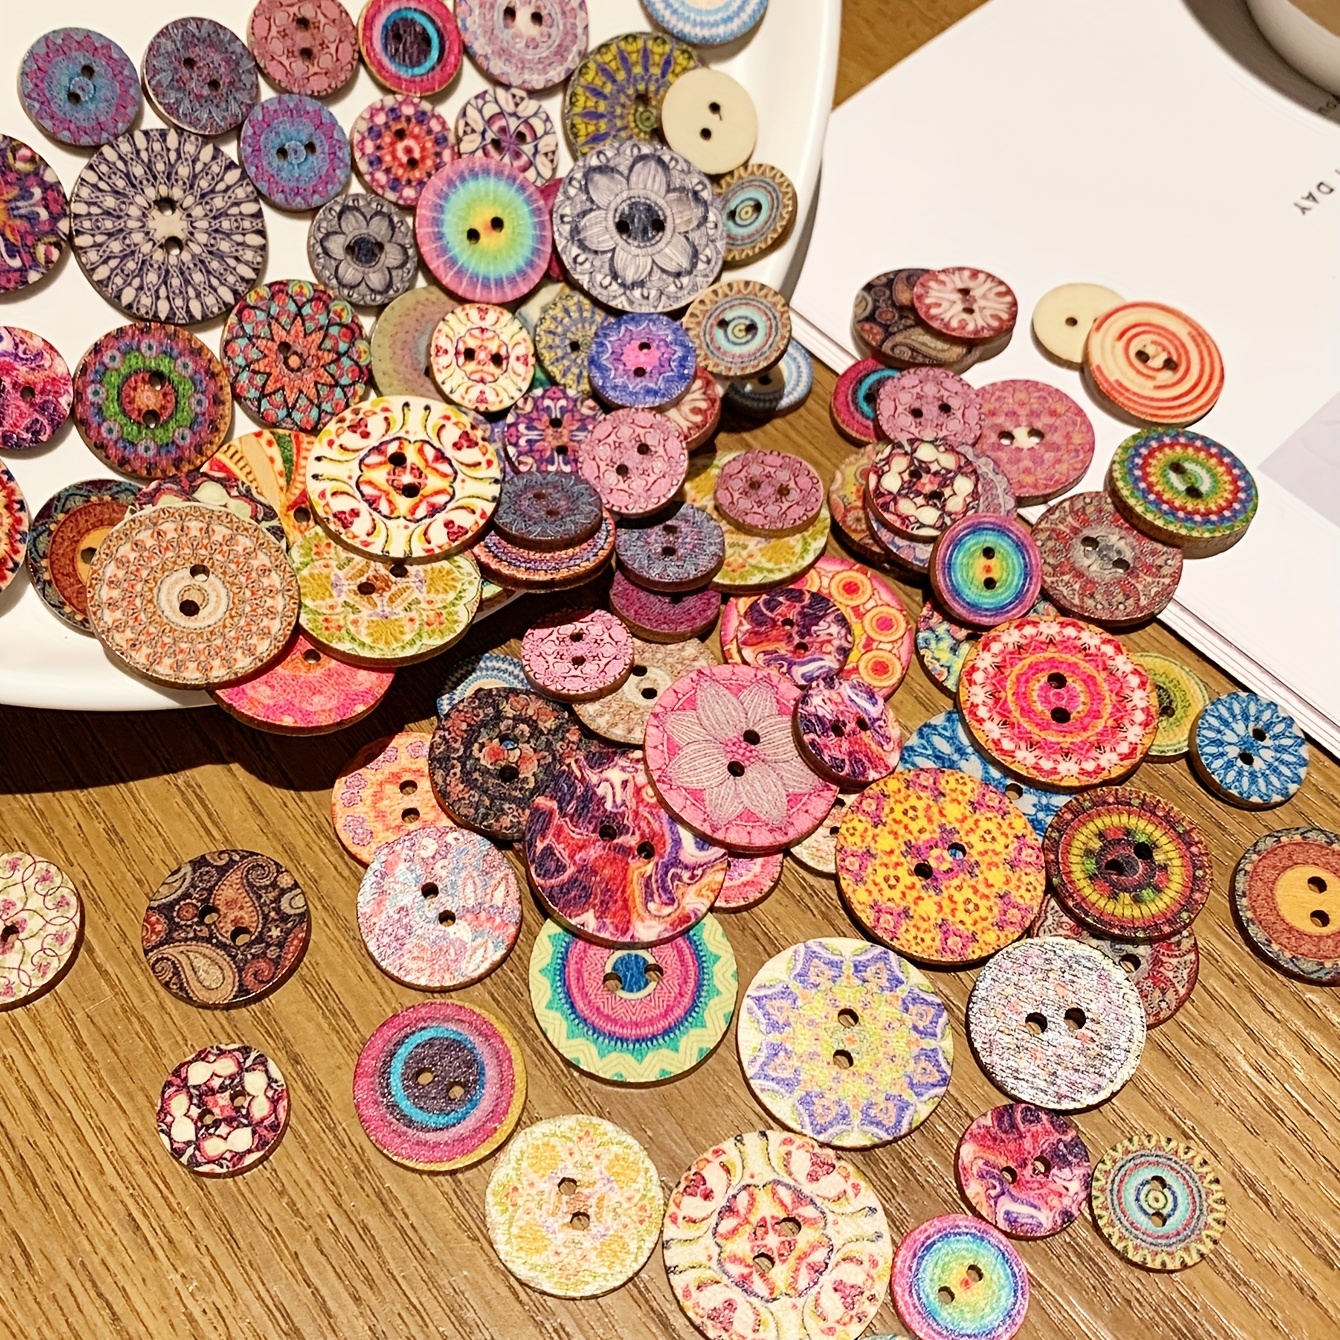 Buttons for Crafts 100pcs, 13mm Stylish Patterns Design Coconut Shell Craft  Buttons Round Wooden Buttons for Clothing Ornament DIY Project